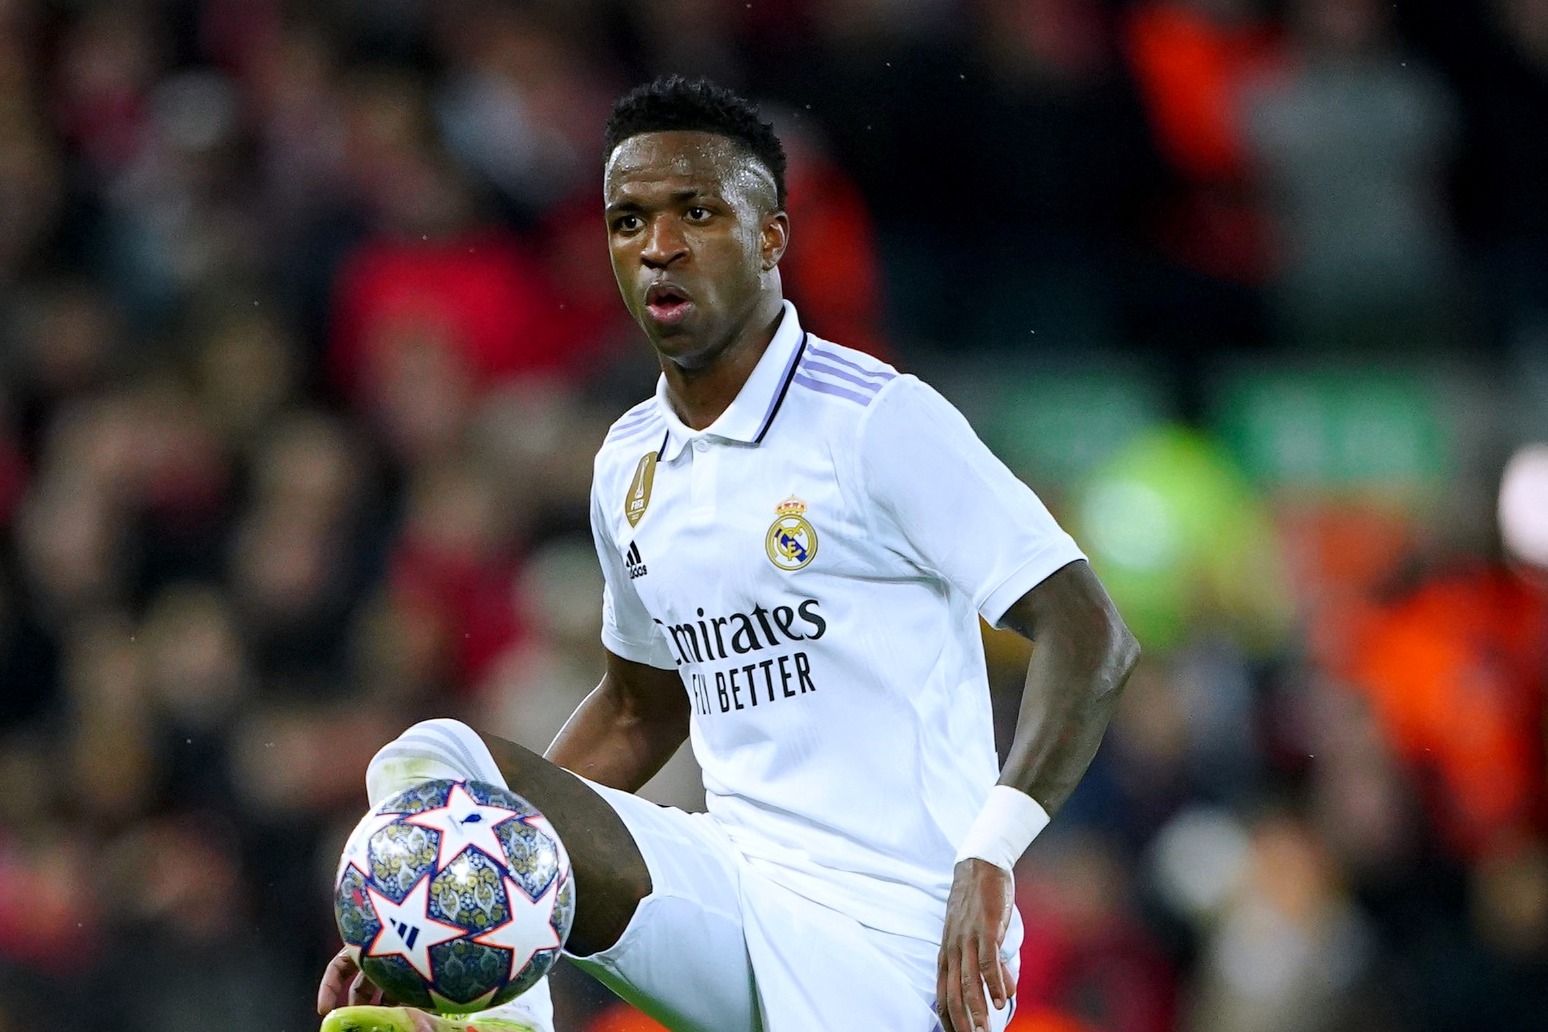 LaLiga requests greater powers to punish racism following Vinicius Jr incidents 